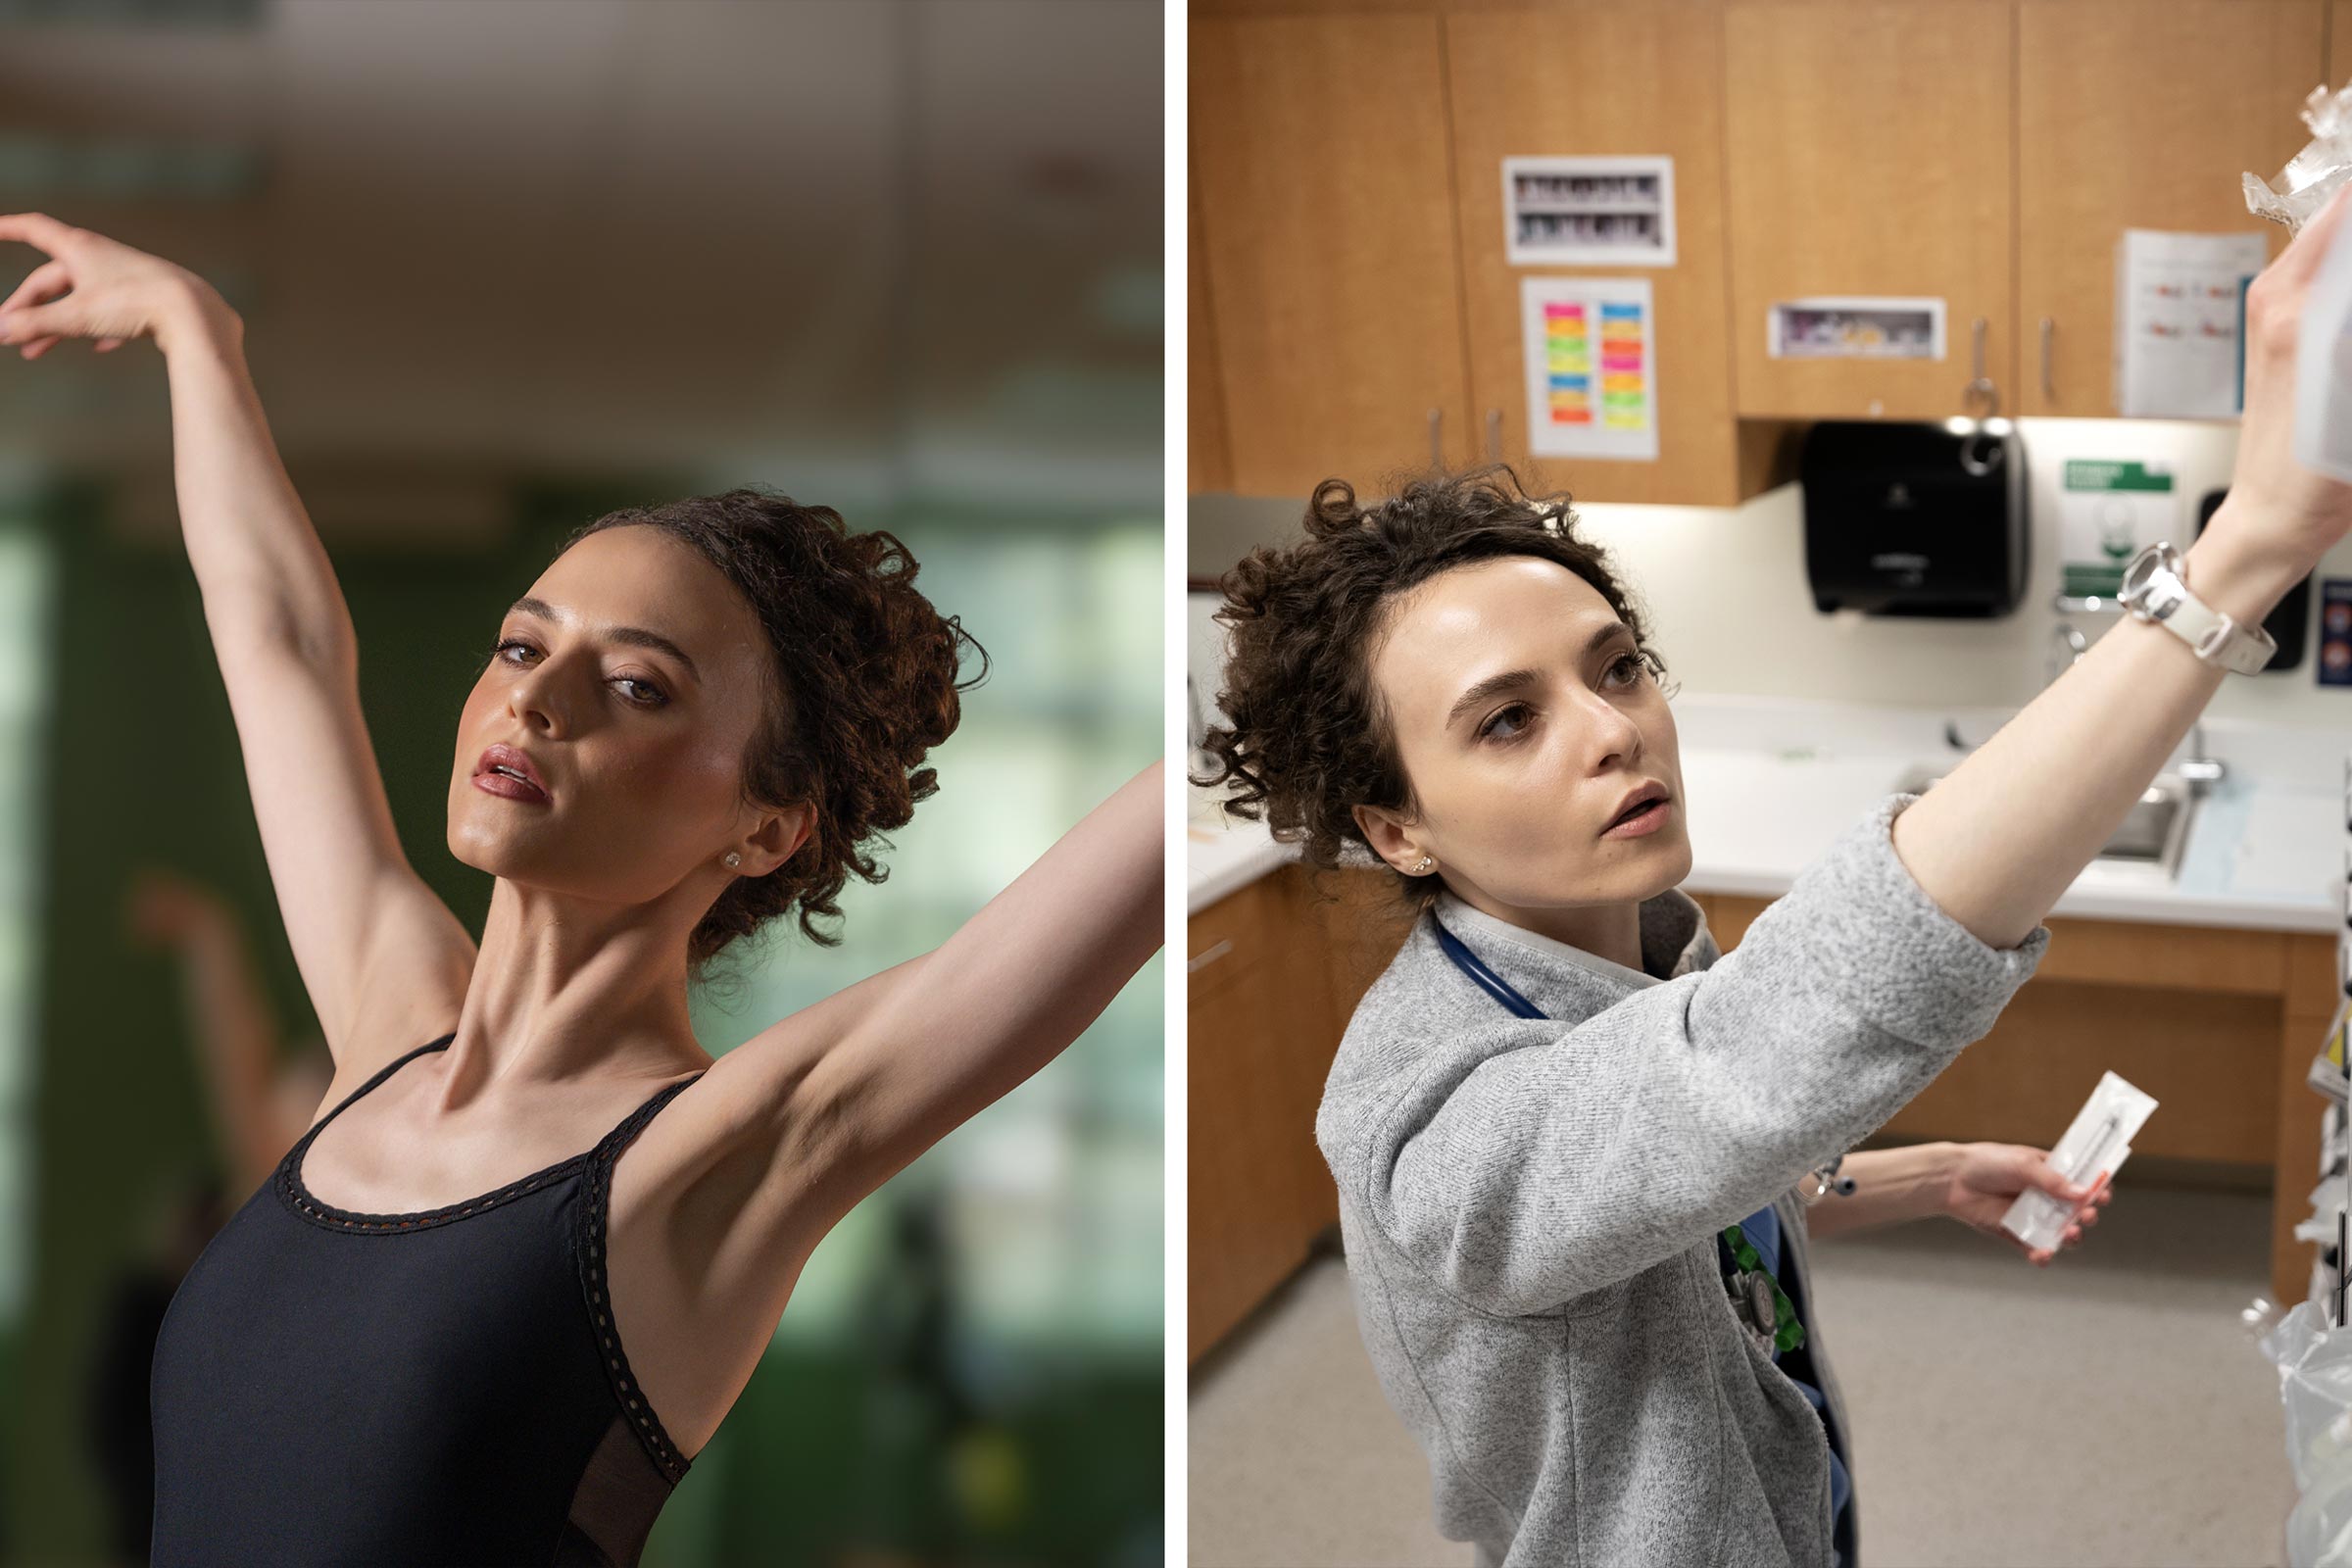 On the left, Molly poses as a ballerina, on the right she reaches in toward a cabinet for medical supplies